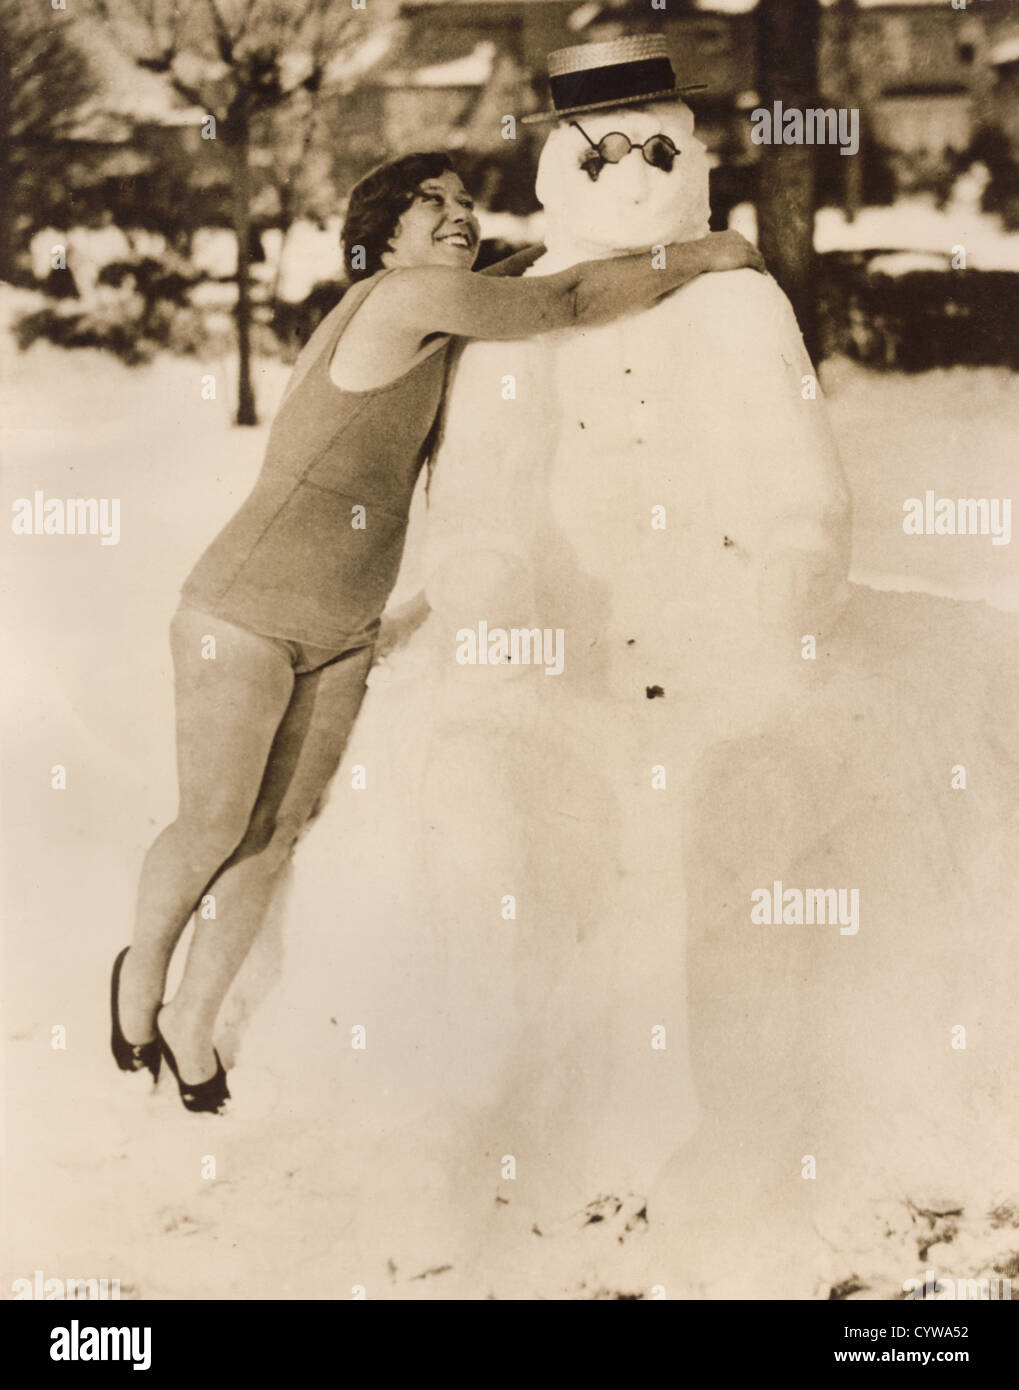 Vintage 1930's press photo of young woman hugging snowman before going in the water for a swim, Manhattan Beach, New York, U.S.A Stock Photo